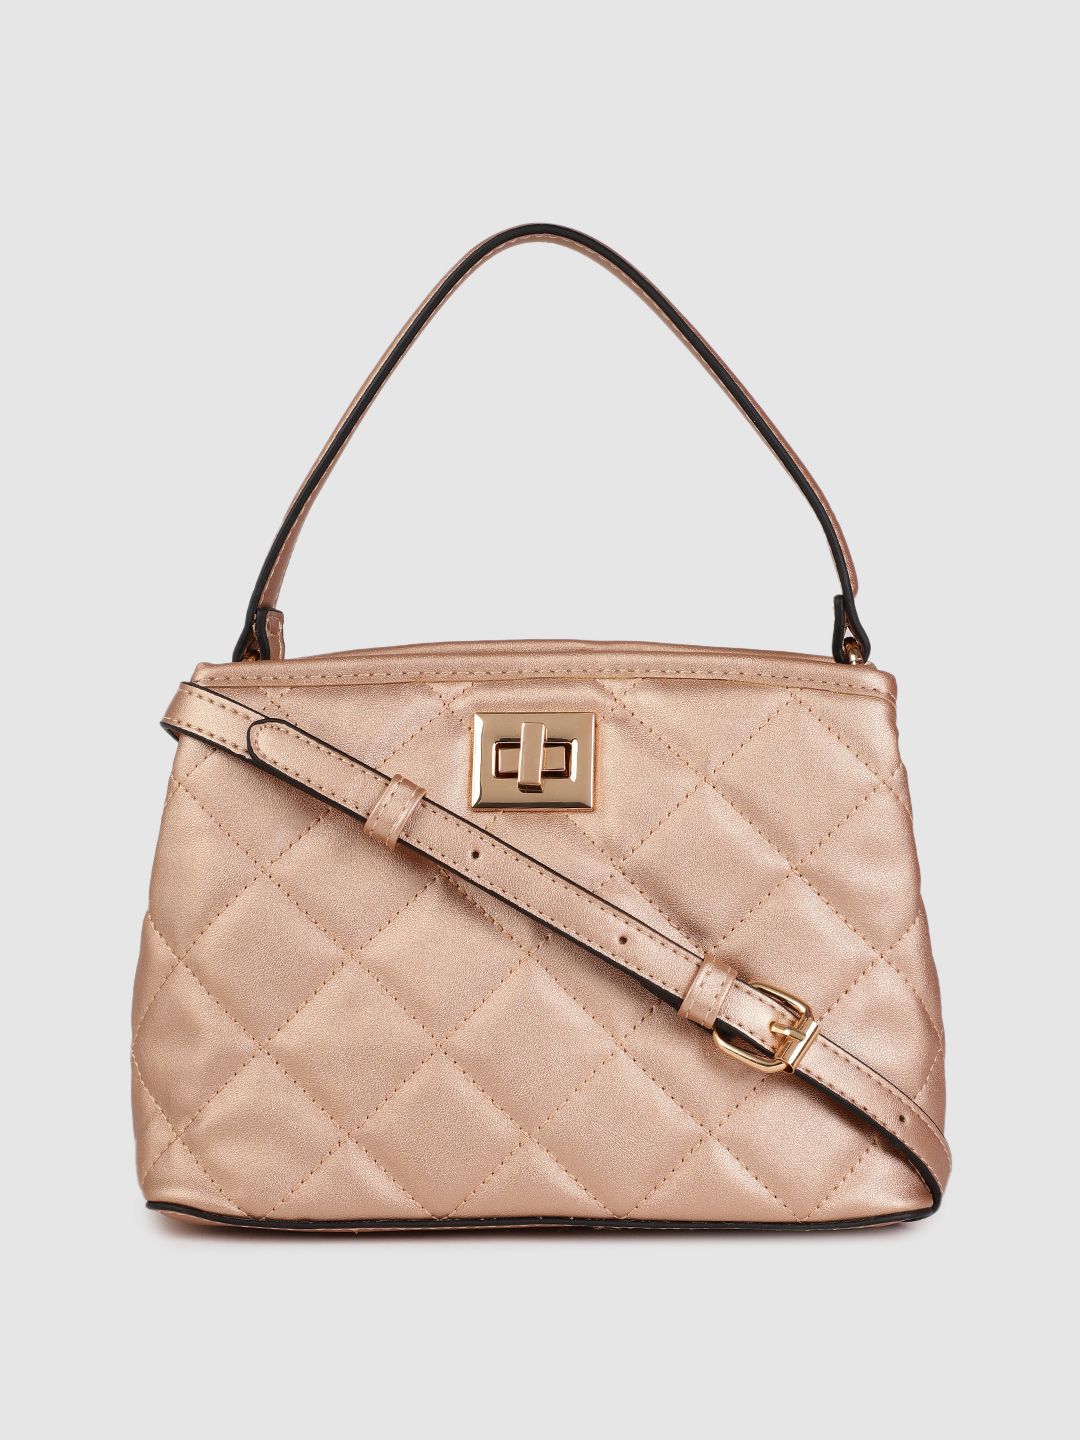 Accessorize Rose Gold-Toned Quilted Handheld Bag Price in India